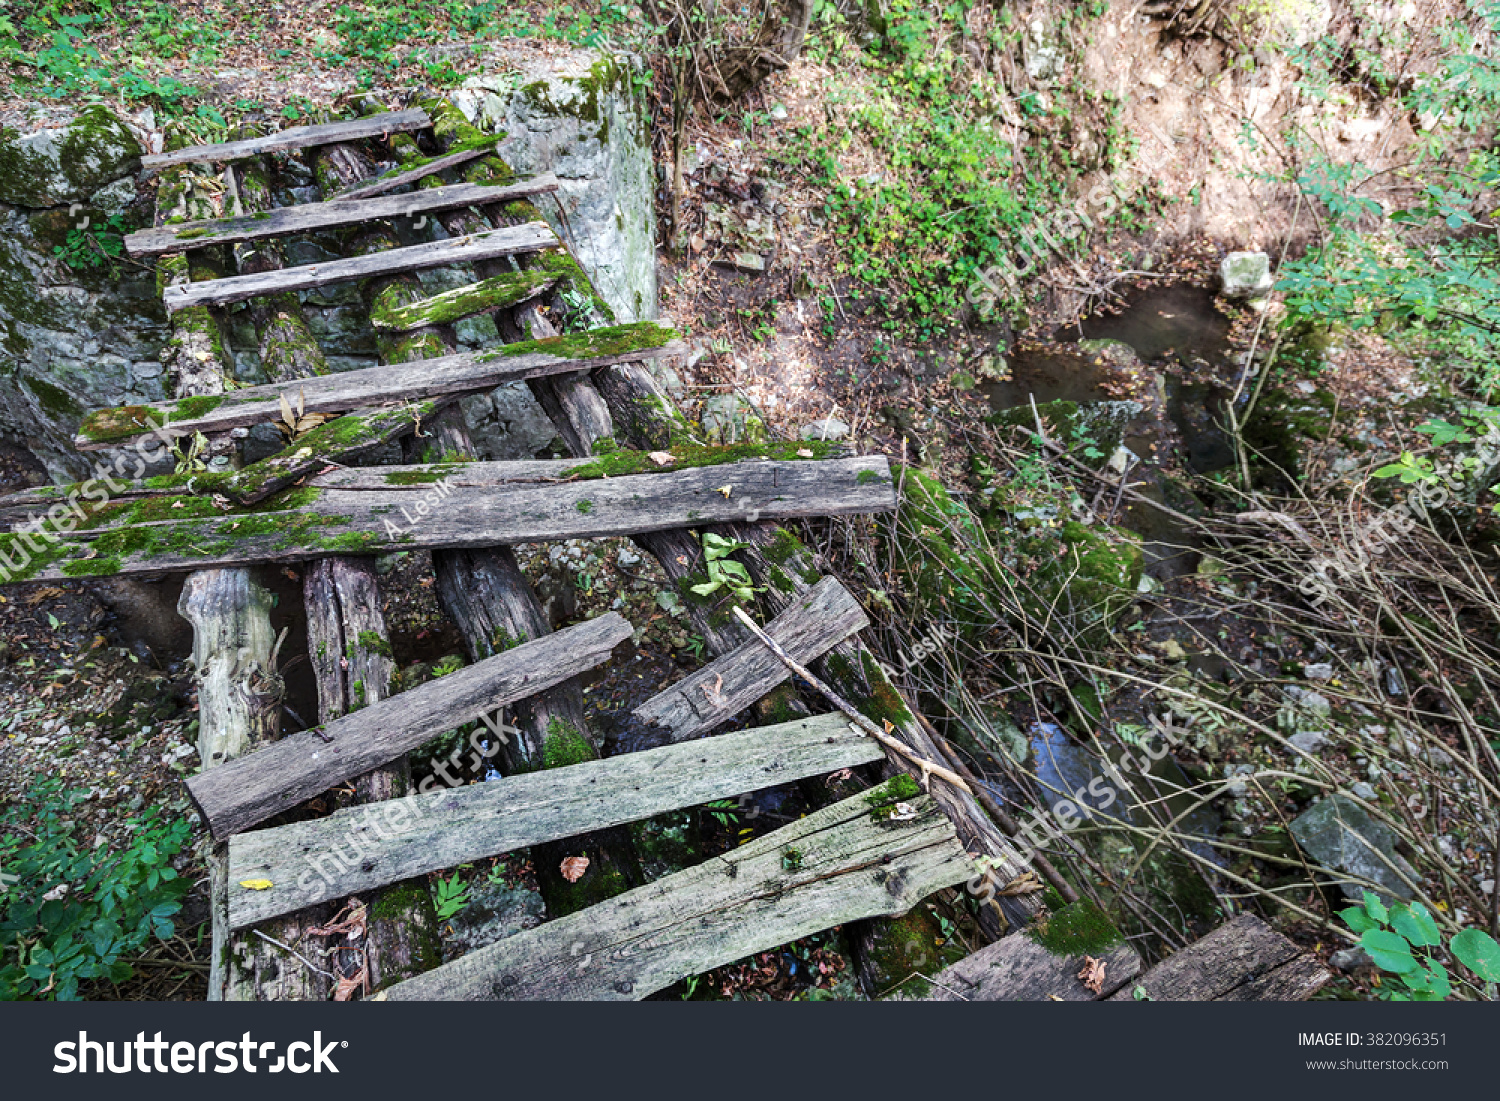 stock-photo-old-ruined-wooden-foot-bridg